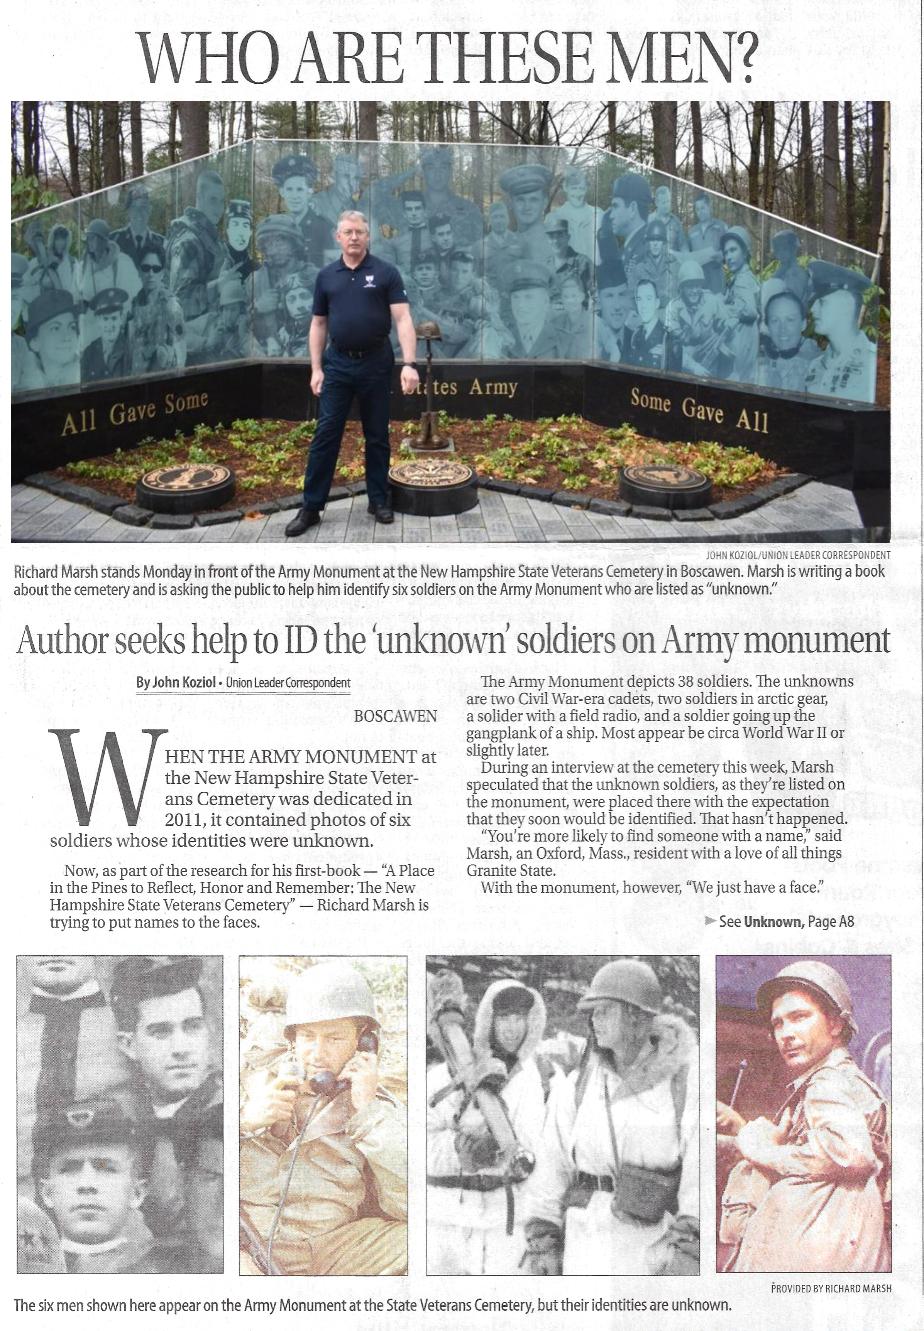 Richard Marsh Union Leader Article - U.S. Army monument at the NH State Veterans Cemetery